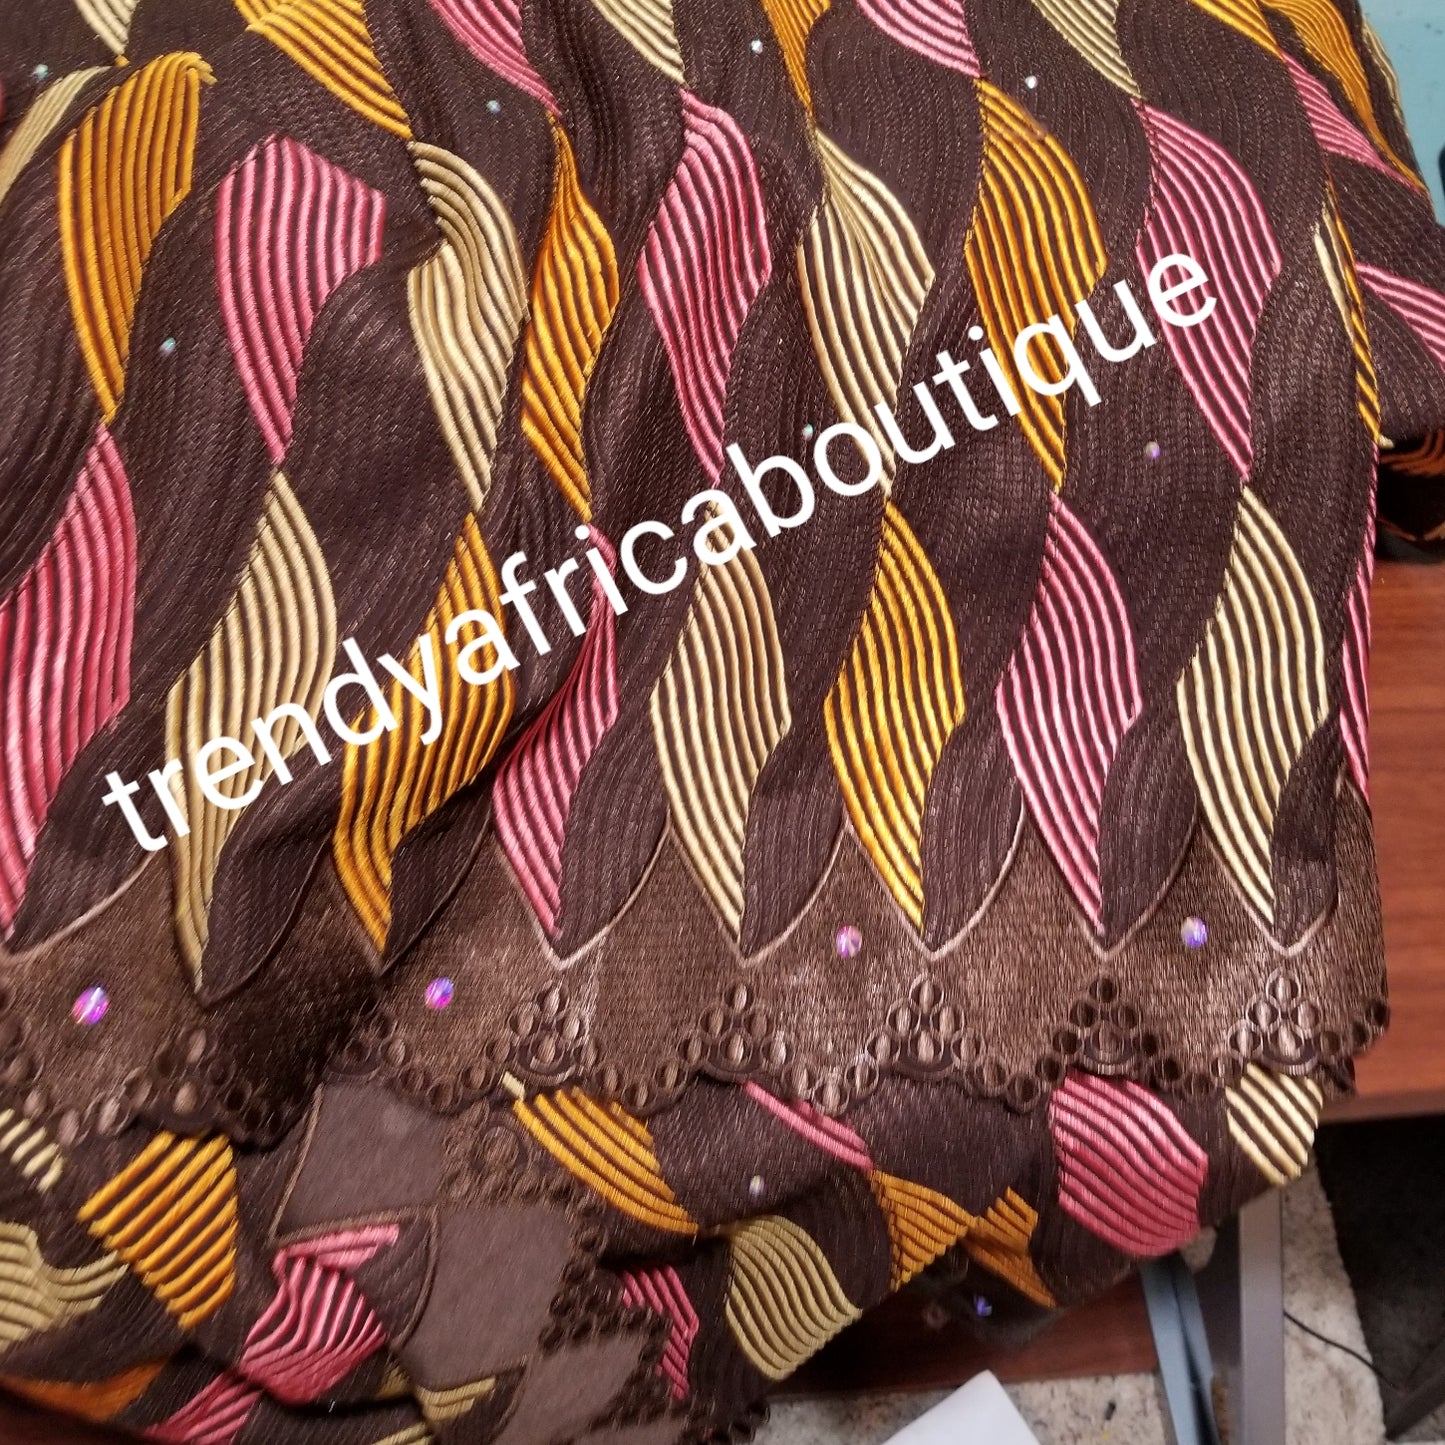 Quality embroidery Swiss lace fabric. Coffee brown lace background. Soft texture, quality embroidery on chocolate background with multi color embriodery. Sold  per 5yds and price is for 5yds. Nigerian party laces at food prices